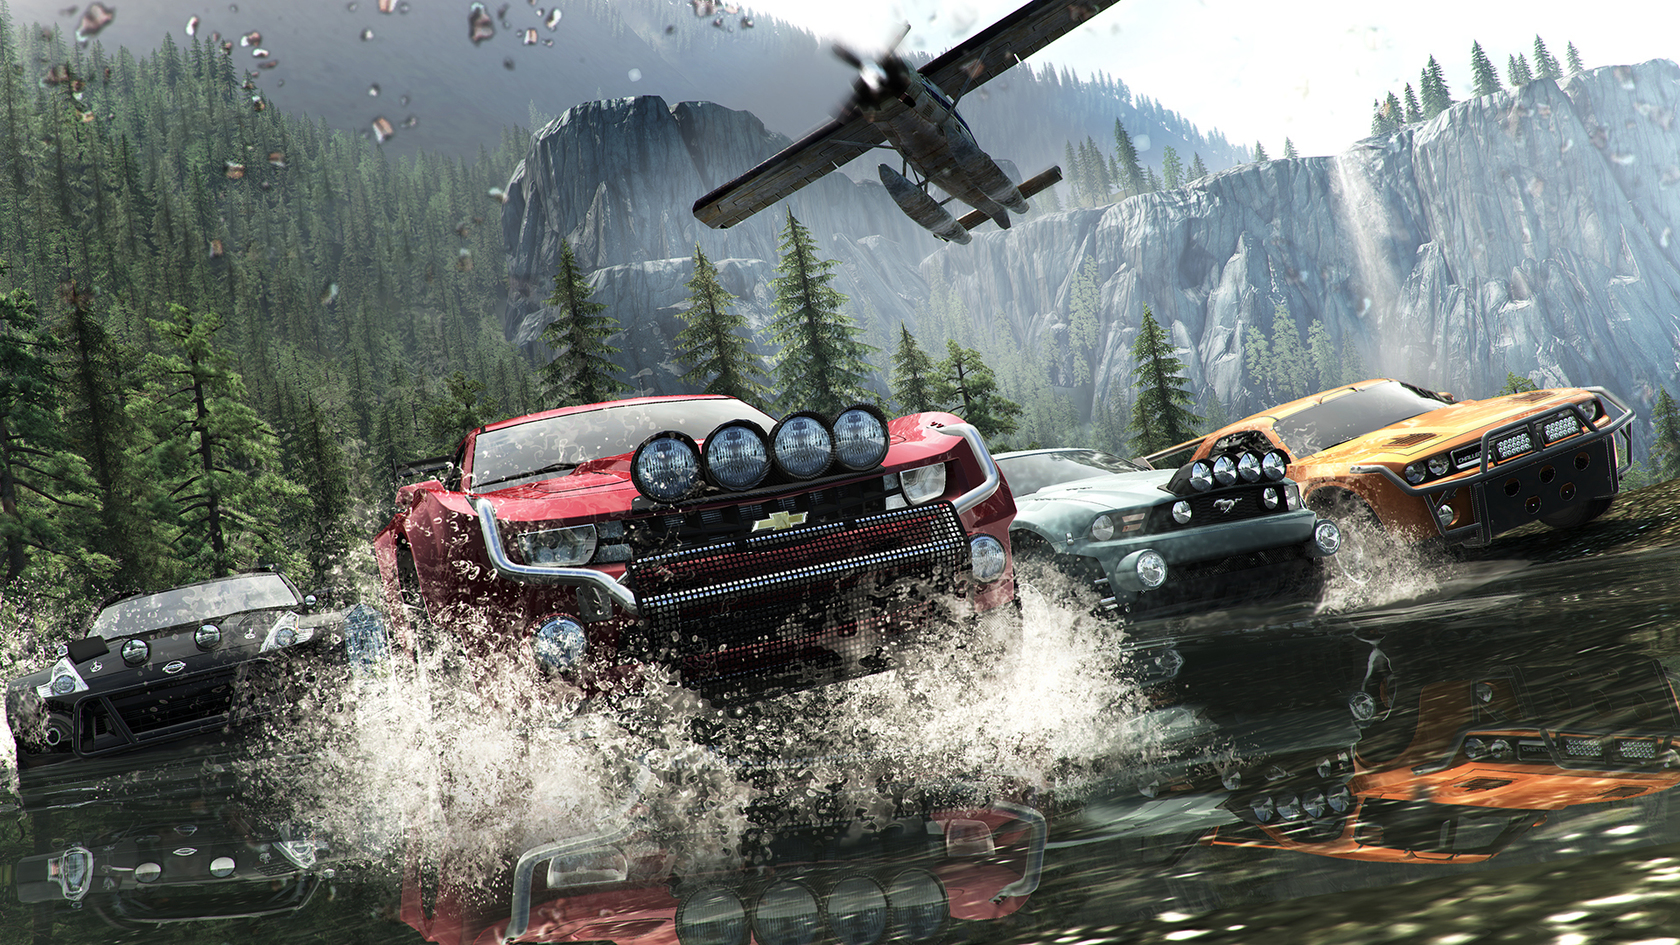 The Crew: Ultimate Edition - Metacritic